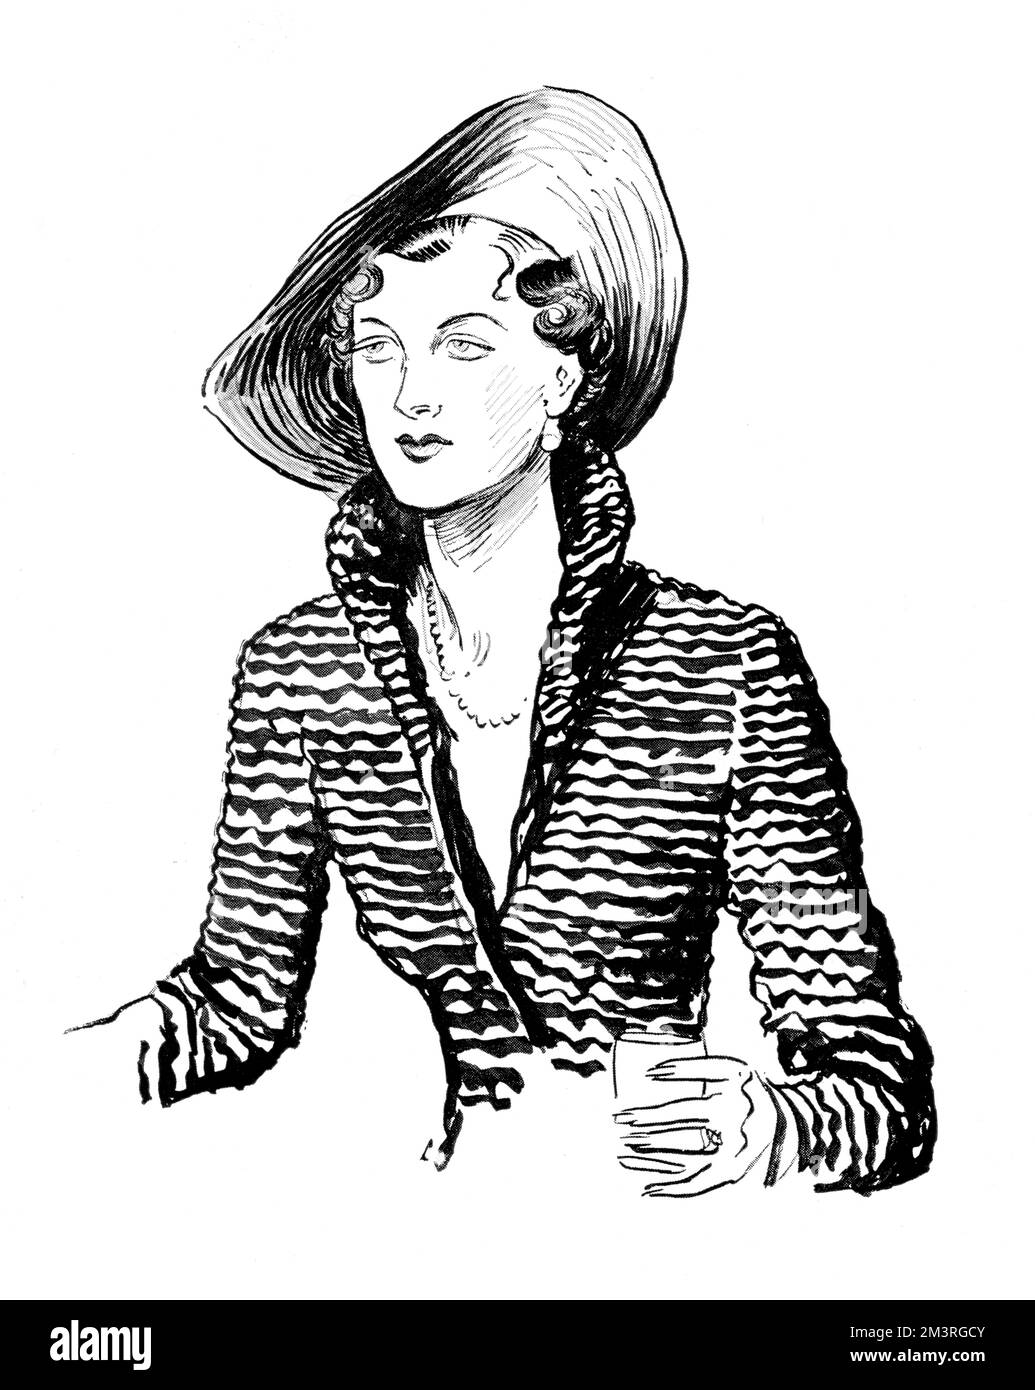 Mrs James Beck, socialite and daughter of one of the famous Wyndham sisters painted by Sargent, pictured in a black suit 'made of amusing quilted material by Schiaparelli and wearing a hat of black' at a cocktail party.        Date: 1934 Stock Photo